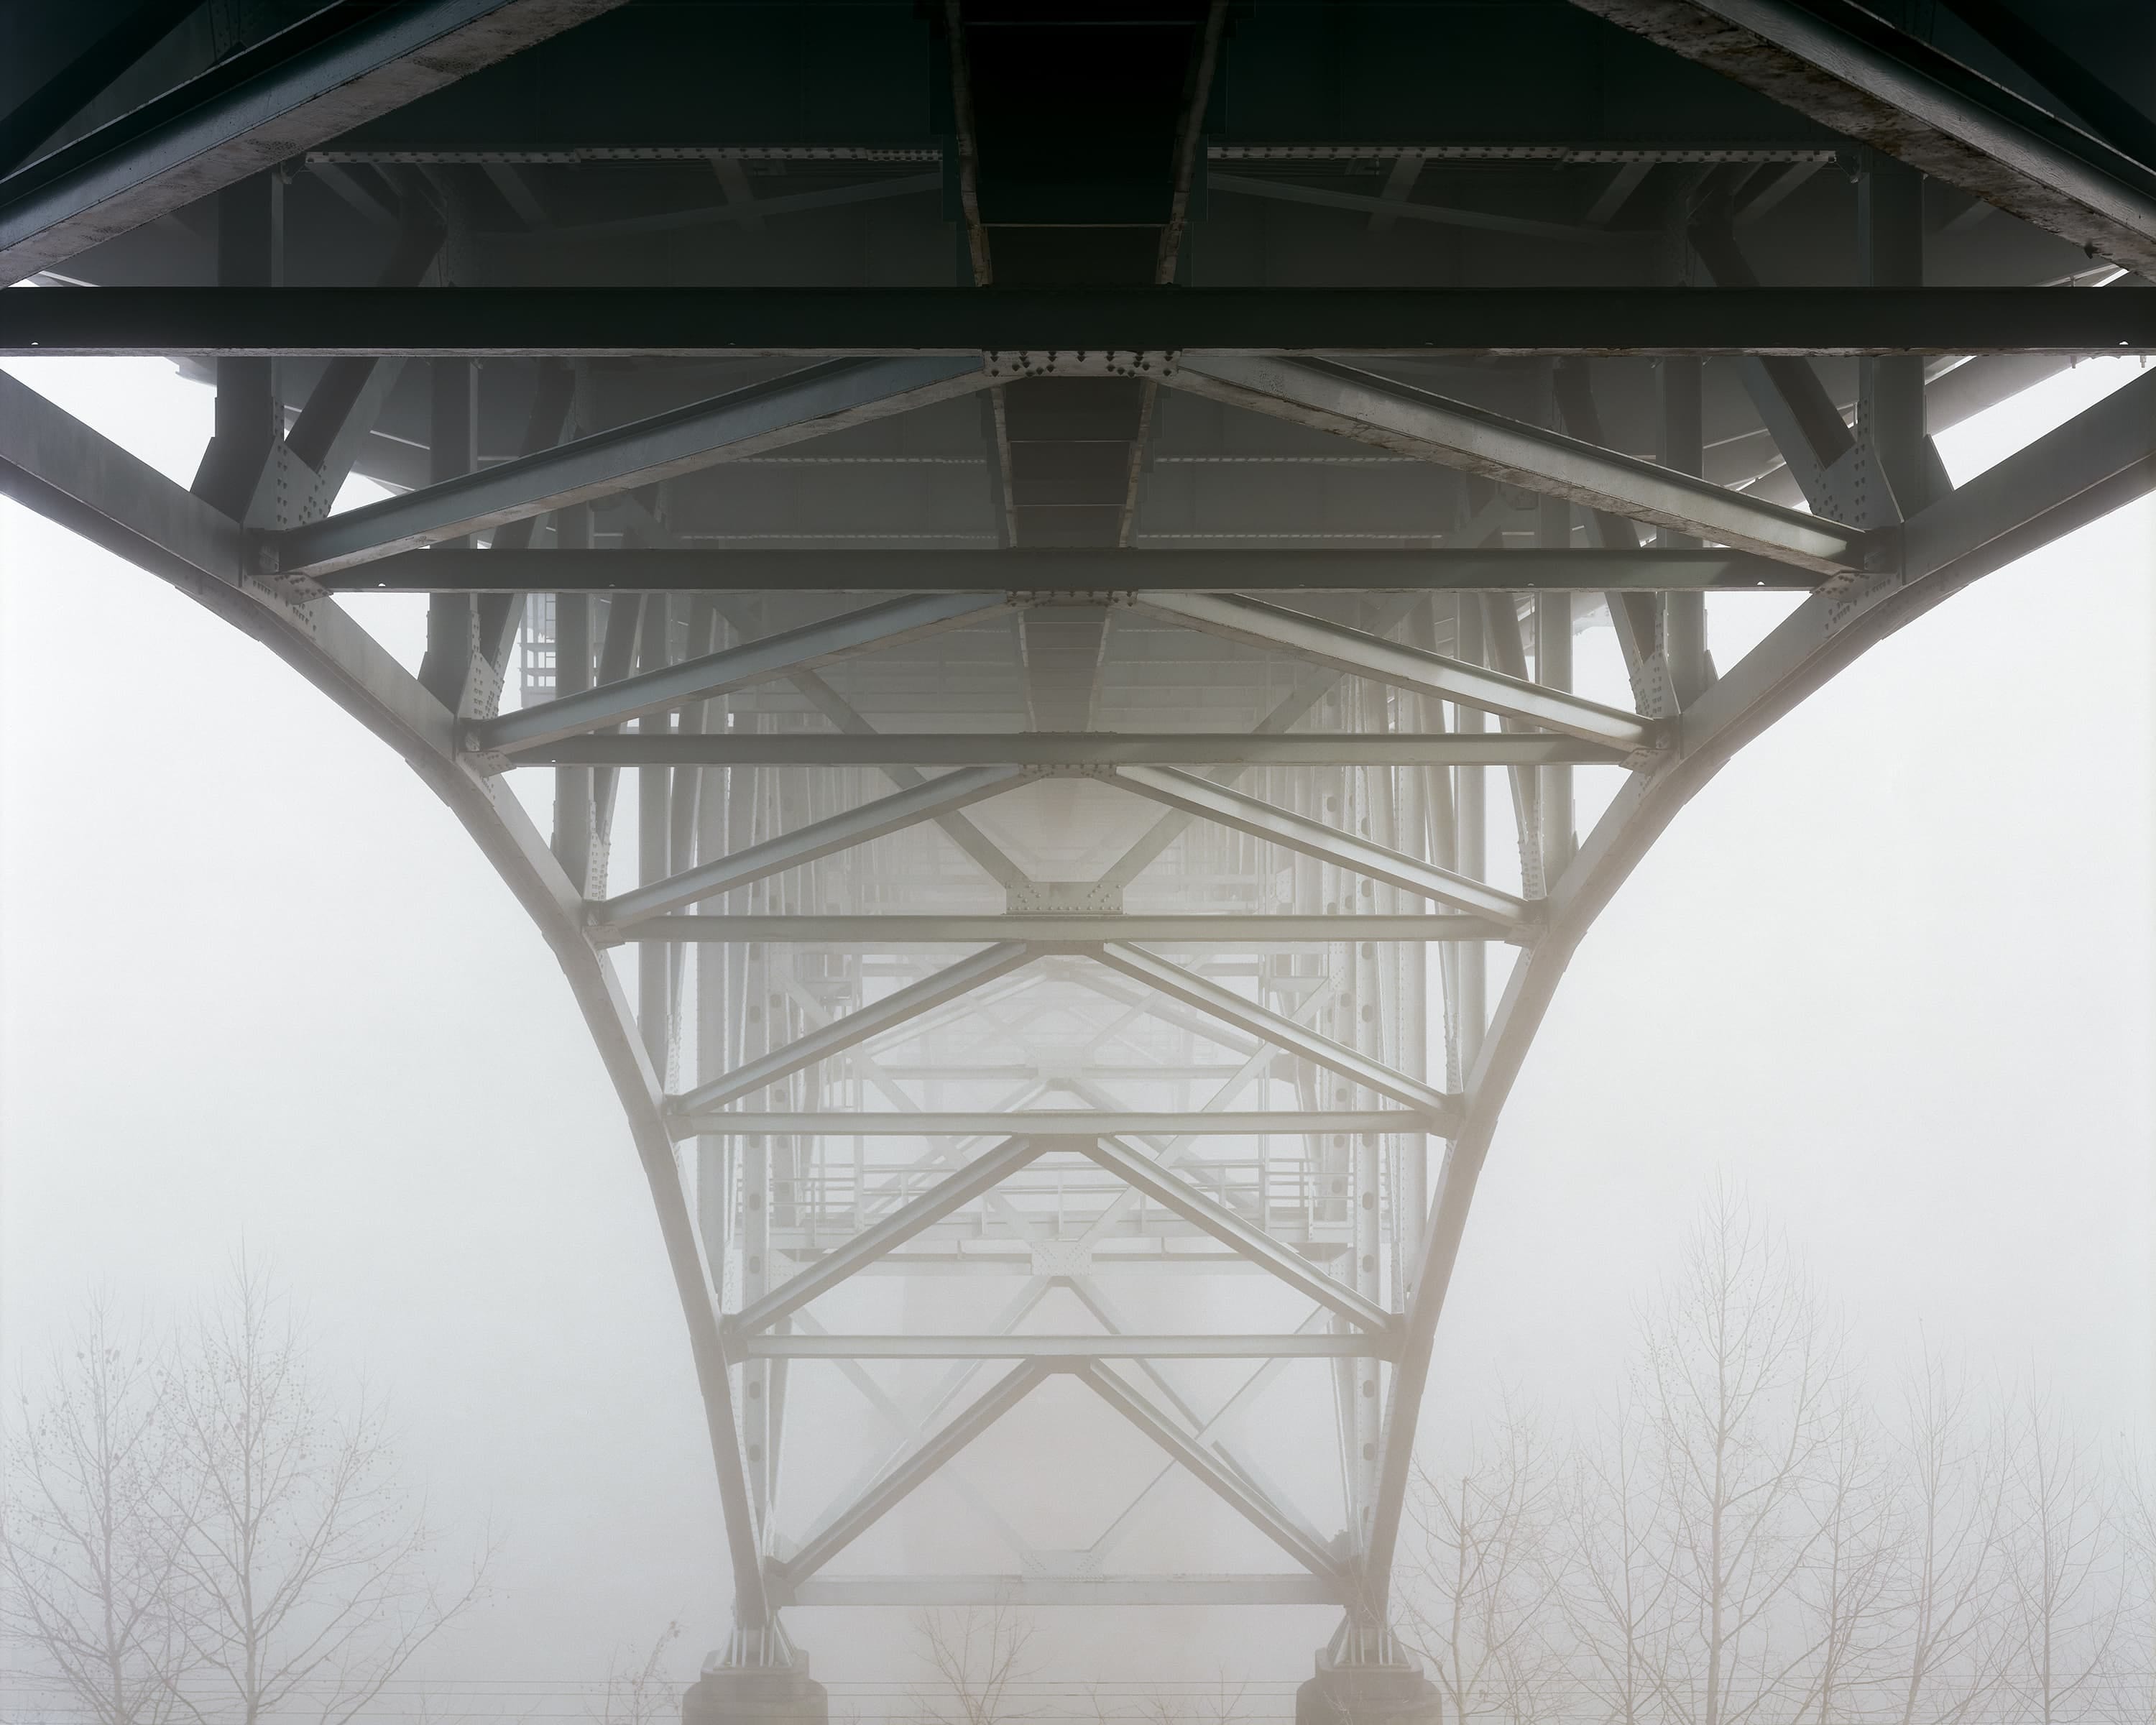 Under the deck truss bridge over Allegheny River, covered in fog.